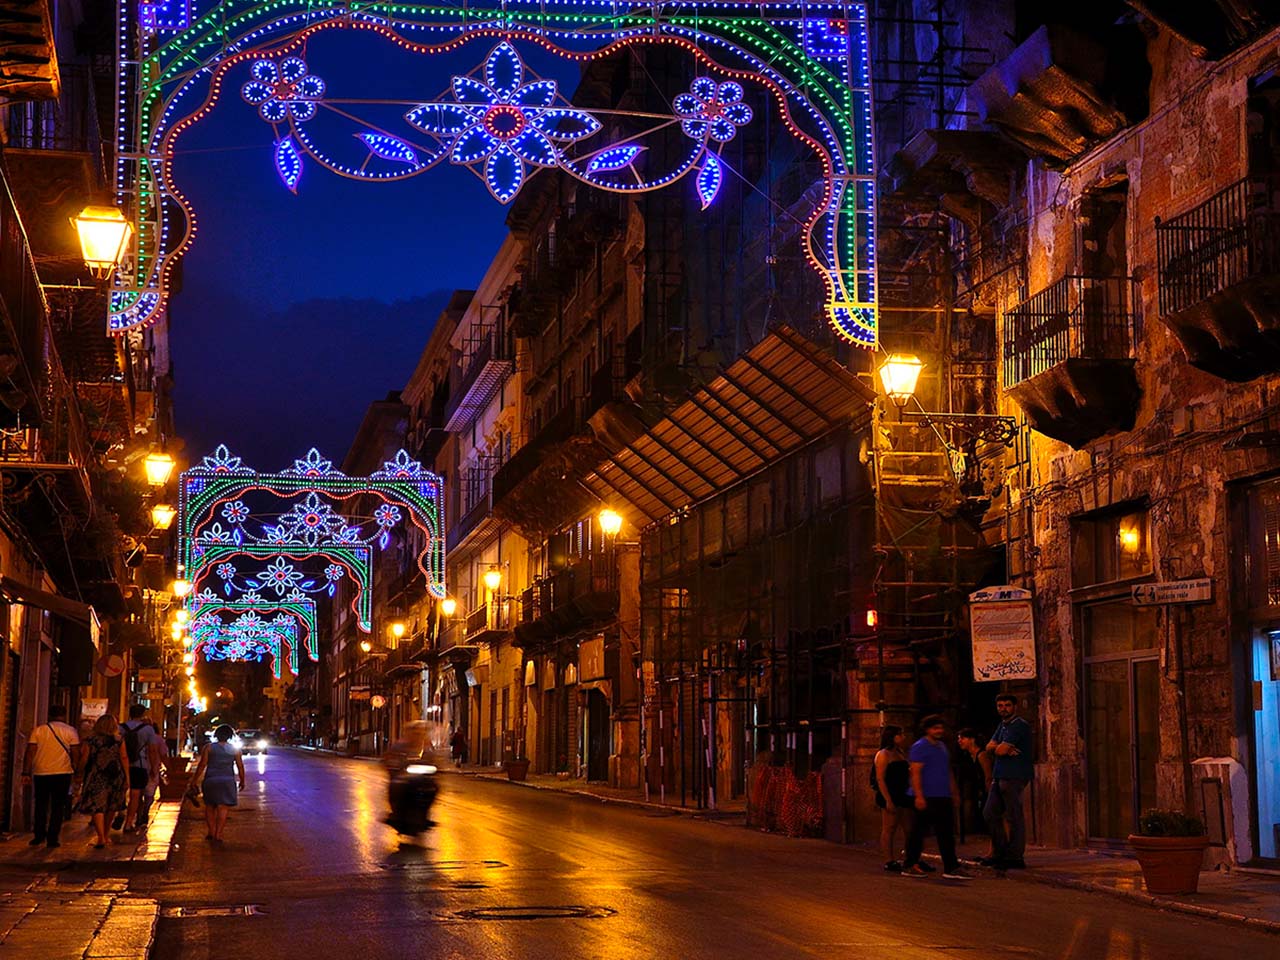 Corso Vittorio Emanuele in Palermo at night, with festive lights